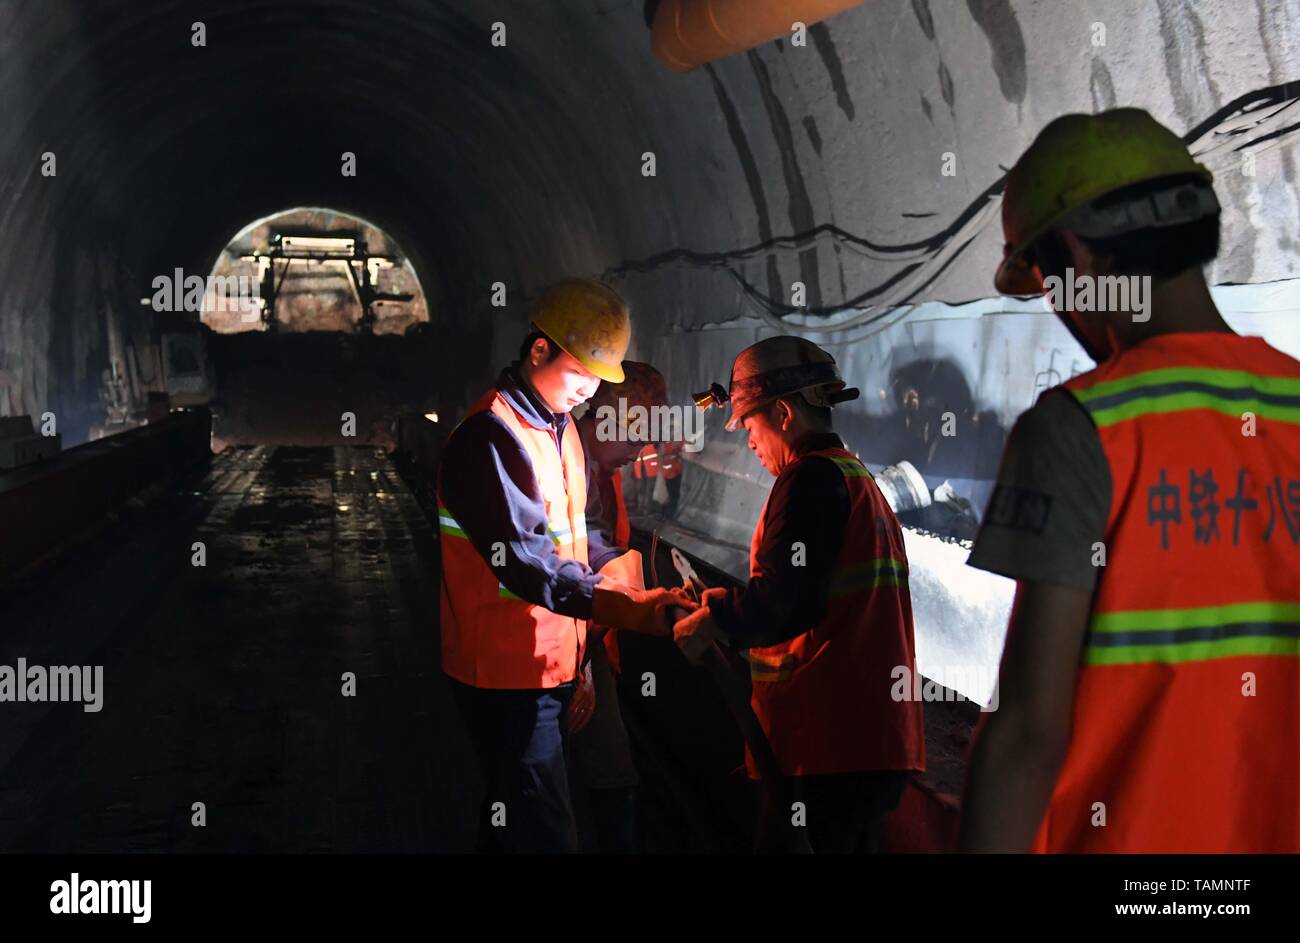 puer-25th-may-2019-constructors-work-at-the-construction-site-of-dajianshan-railway-tunnel-of-the-yuxi-mohan-railway-in-southwest-chinas-yunnan-province-may-25-2019-credit-yang-zongyouxinhuaalamy-live-news-TAMNTF.jpg